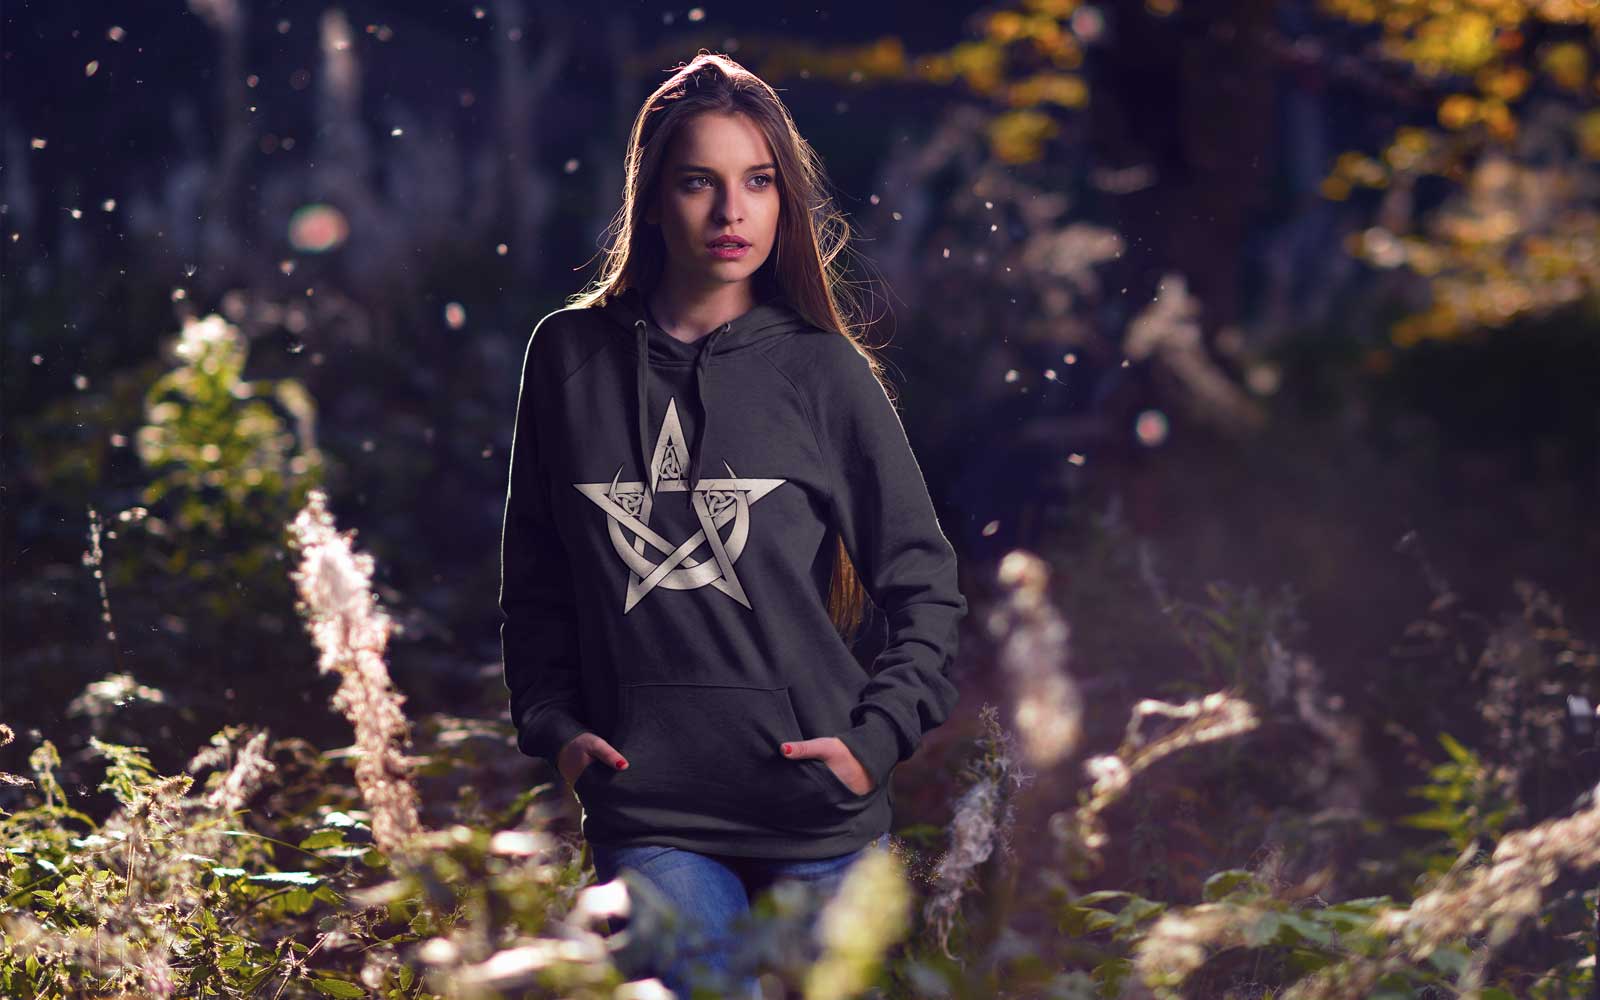 a woman standing in a forest wearing a hoodie with a pentacle and crescent moon design 